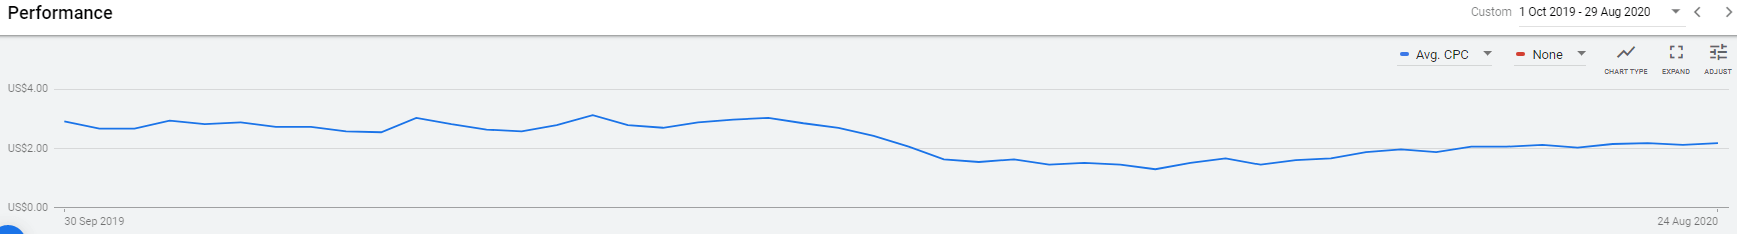 Weekly trend of Google Ads average cost-per-click over the past year – through August 29, 2020